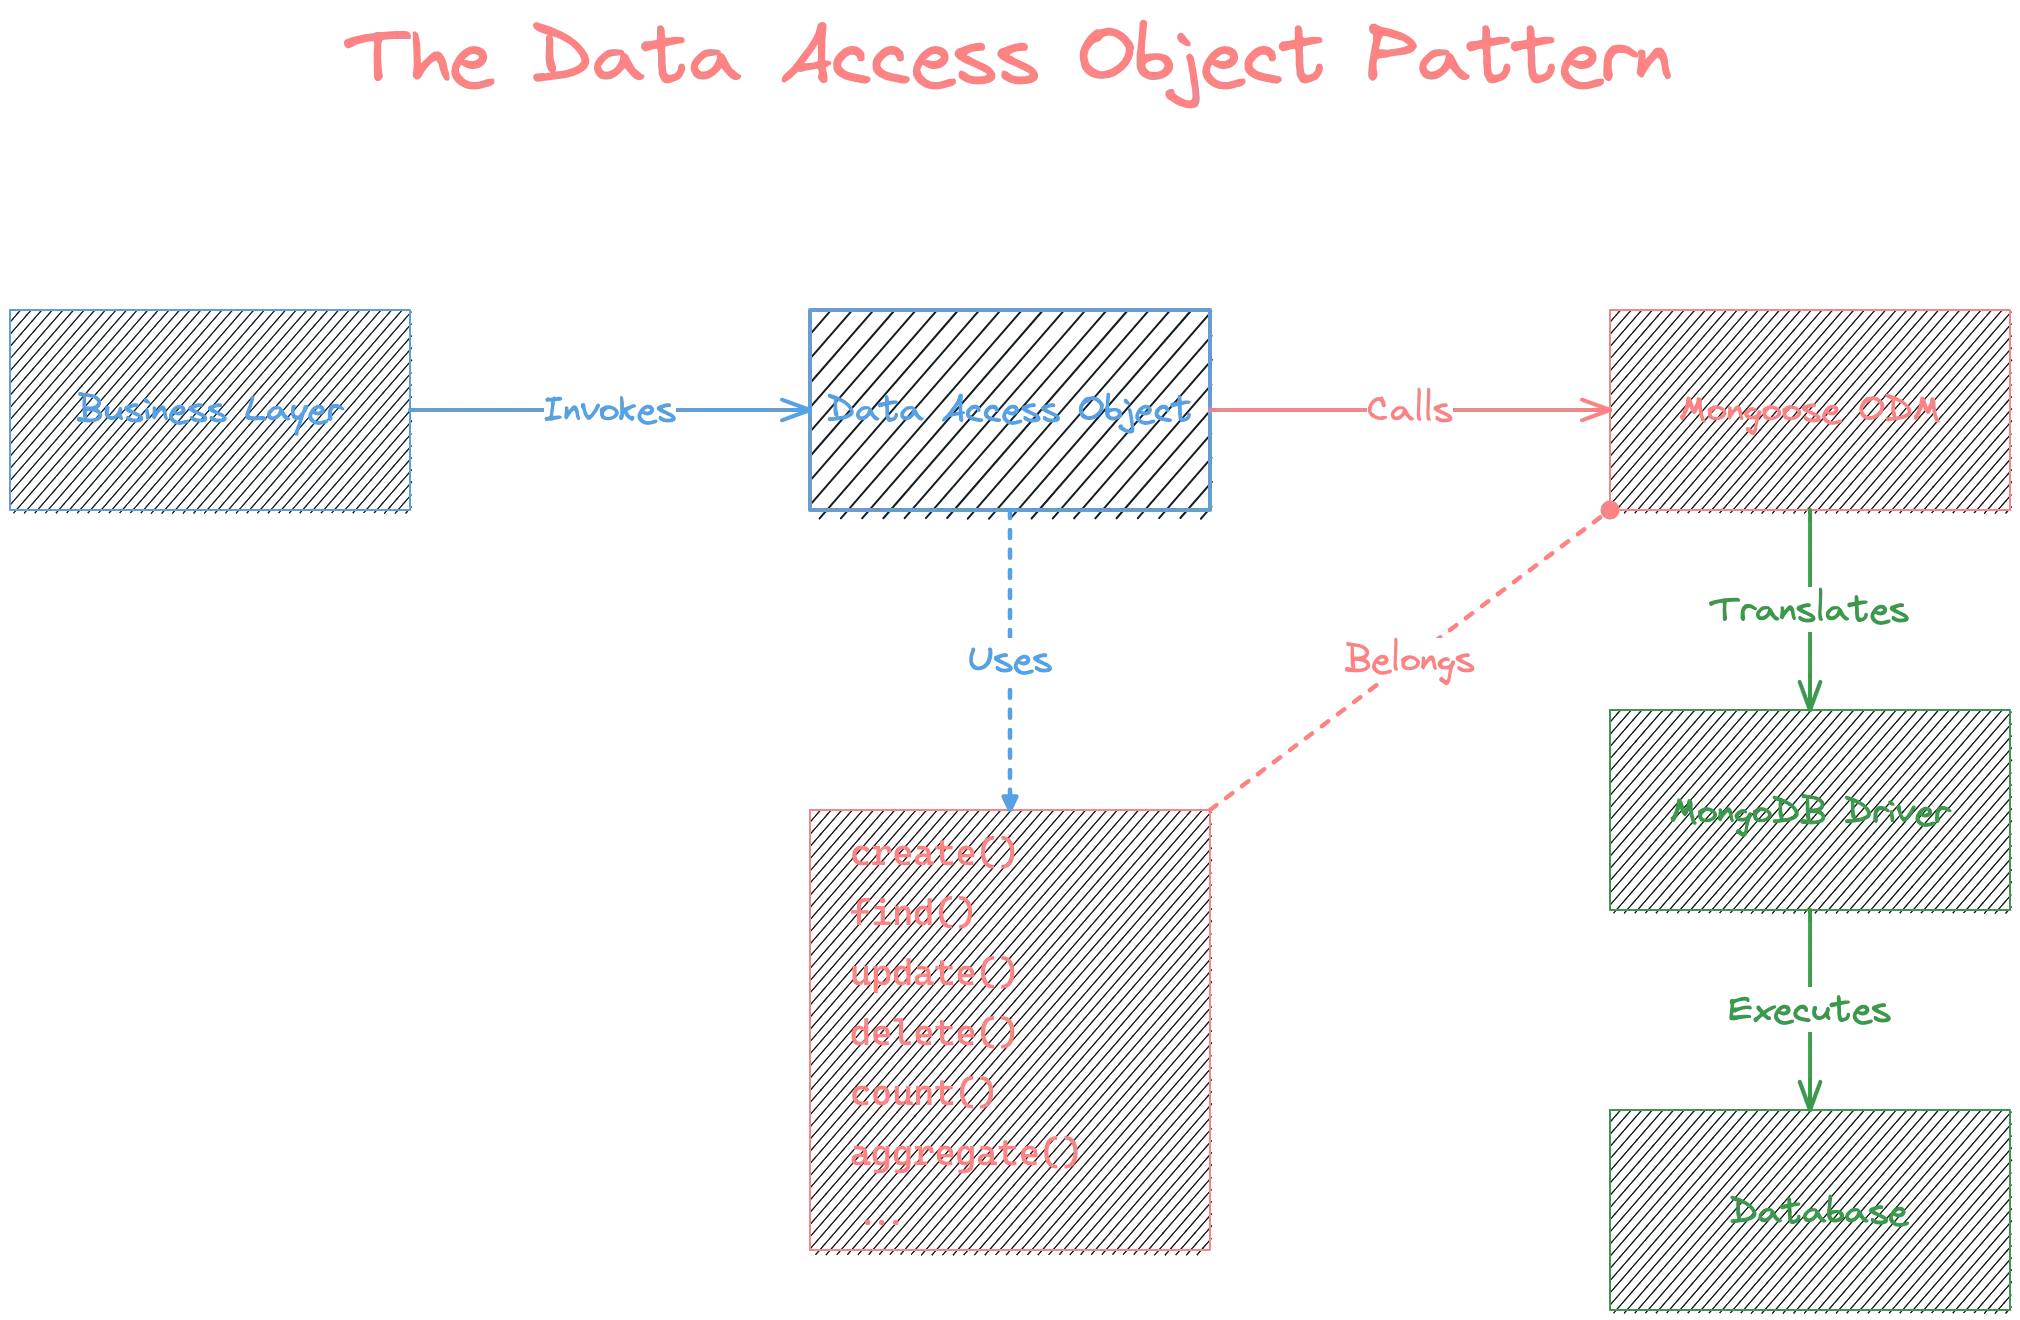 The Data Access Object Pattern